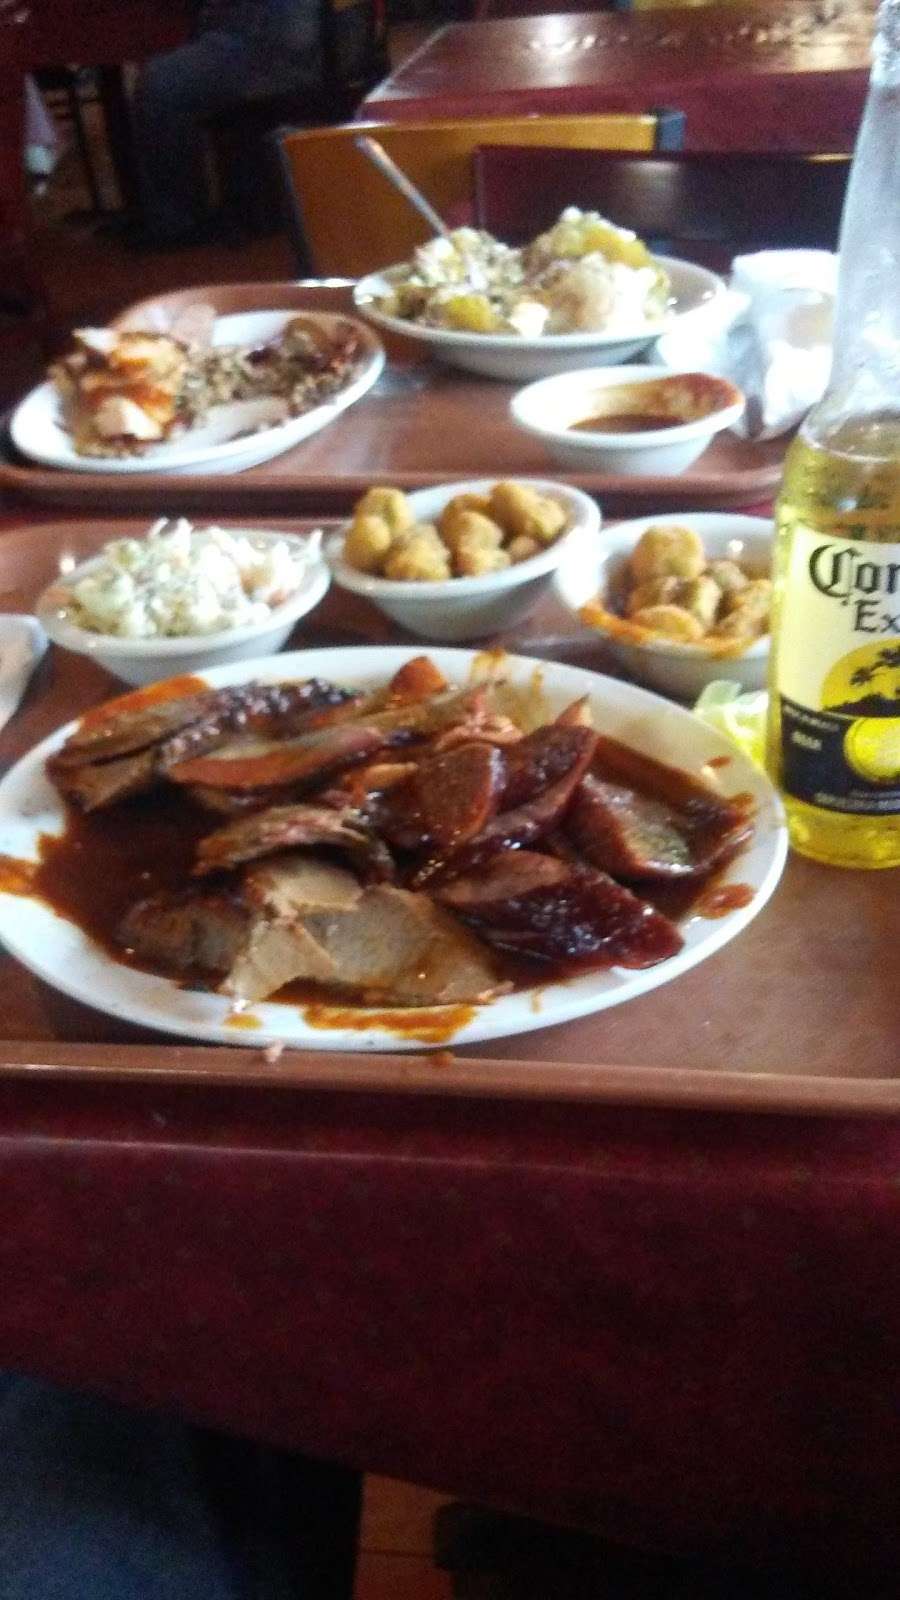 Goings Barbeque Co | 1007 N Main St, Baytown, TX 77520 | Phone: (281) 422-4600